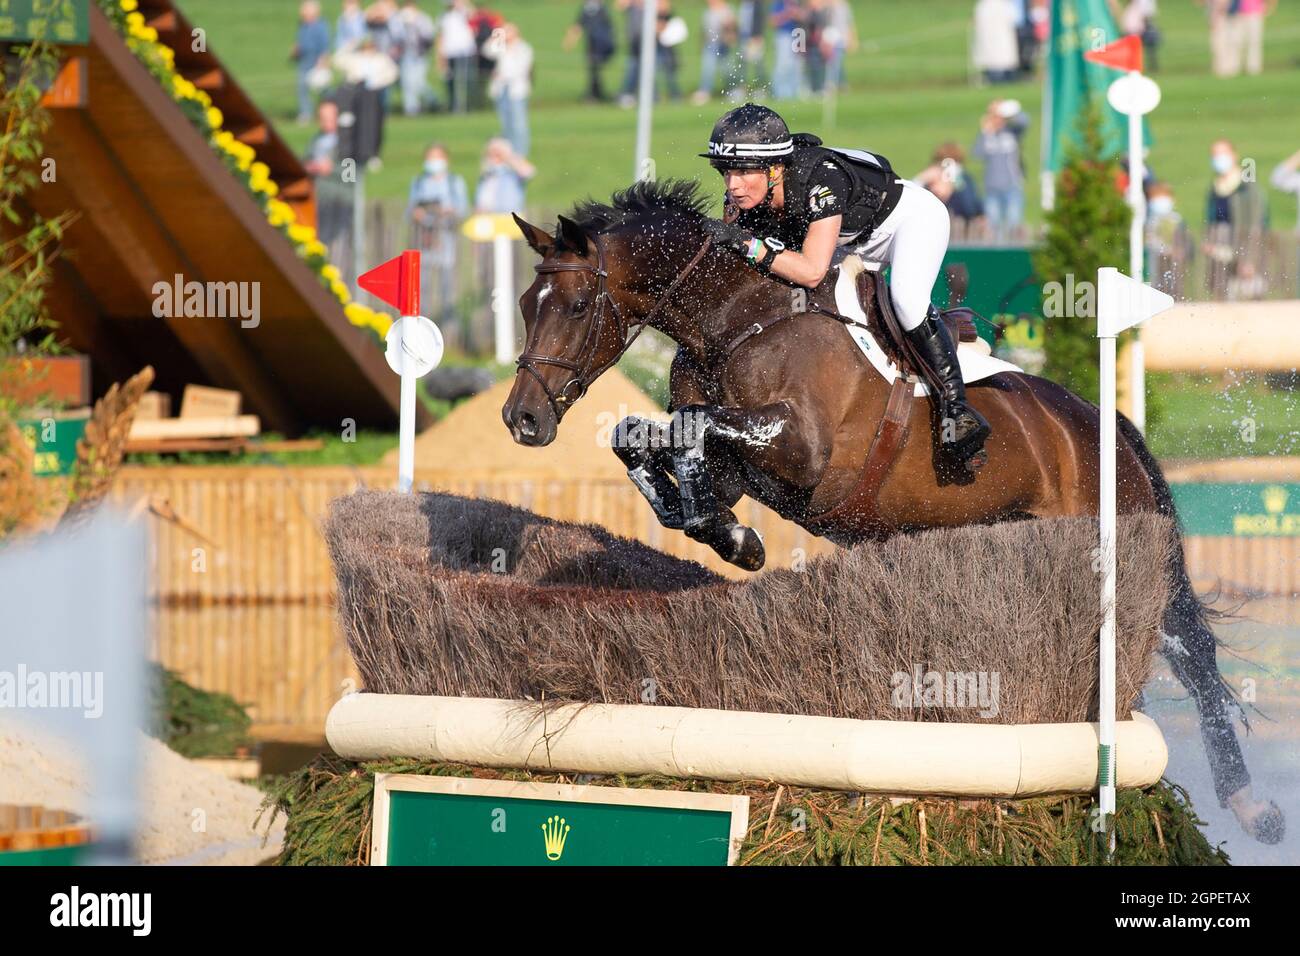 Madison CROWE (NZL) on Waitangi Pinterest, action in the water, in the Rolex Complex, eventing, cross-country C1C: SAP Cup, on September 18, 2021, World Equestrian Festival, CHIO Aachen 2021 from September 10 - 19, 2021 in Aachen / Germany; Â Stock Photo